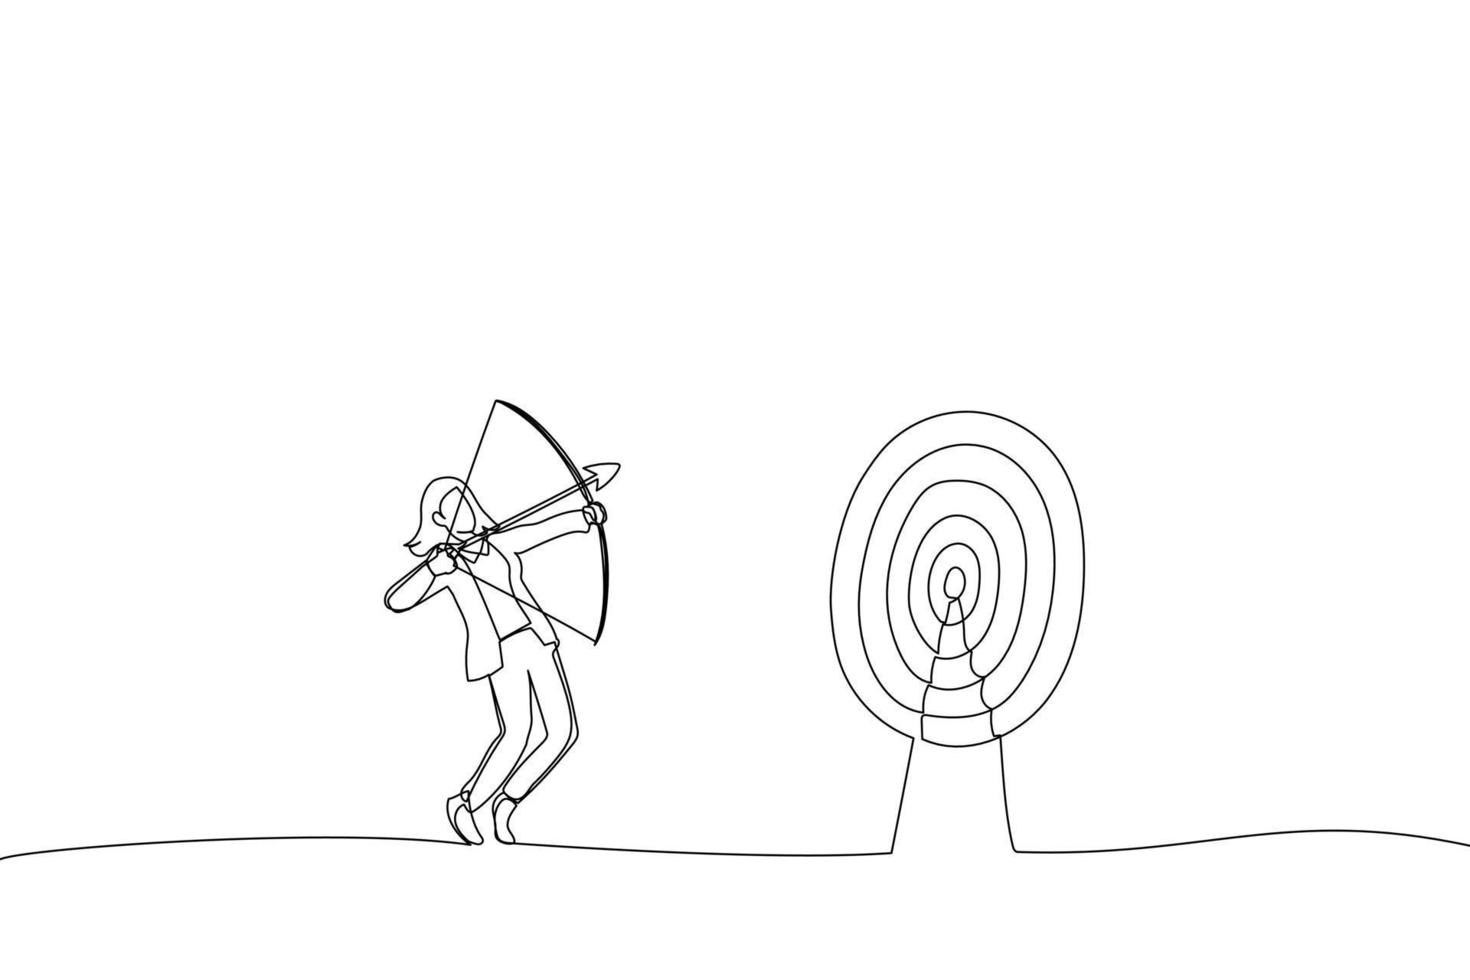 Drawing of blindfolded businesswoman shooting arrow and missed the target. Single continuous line art vector